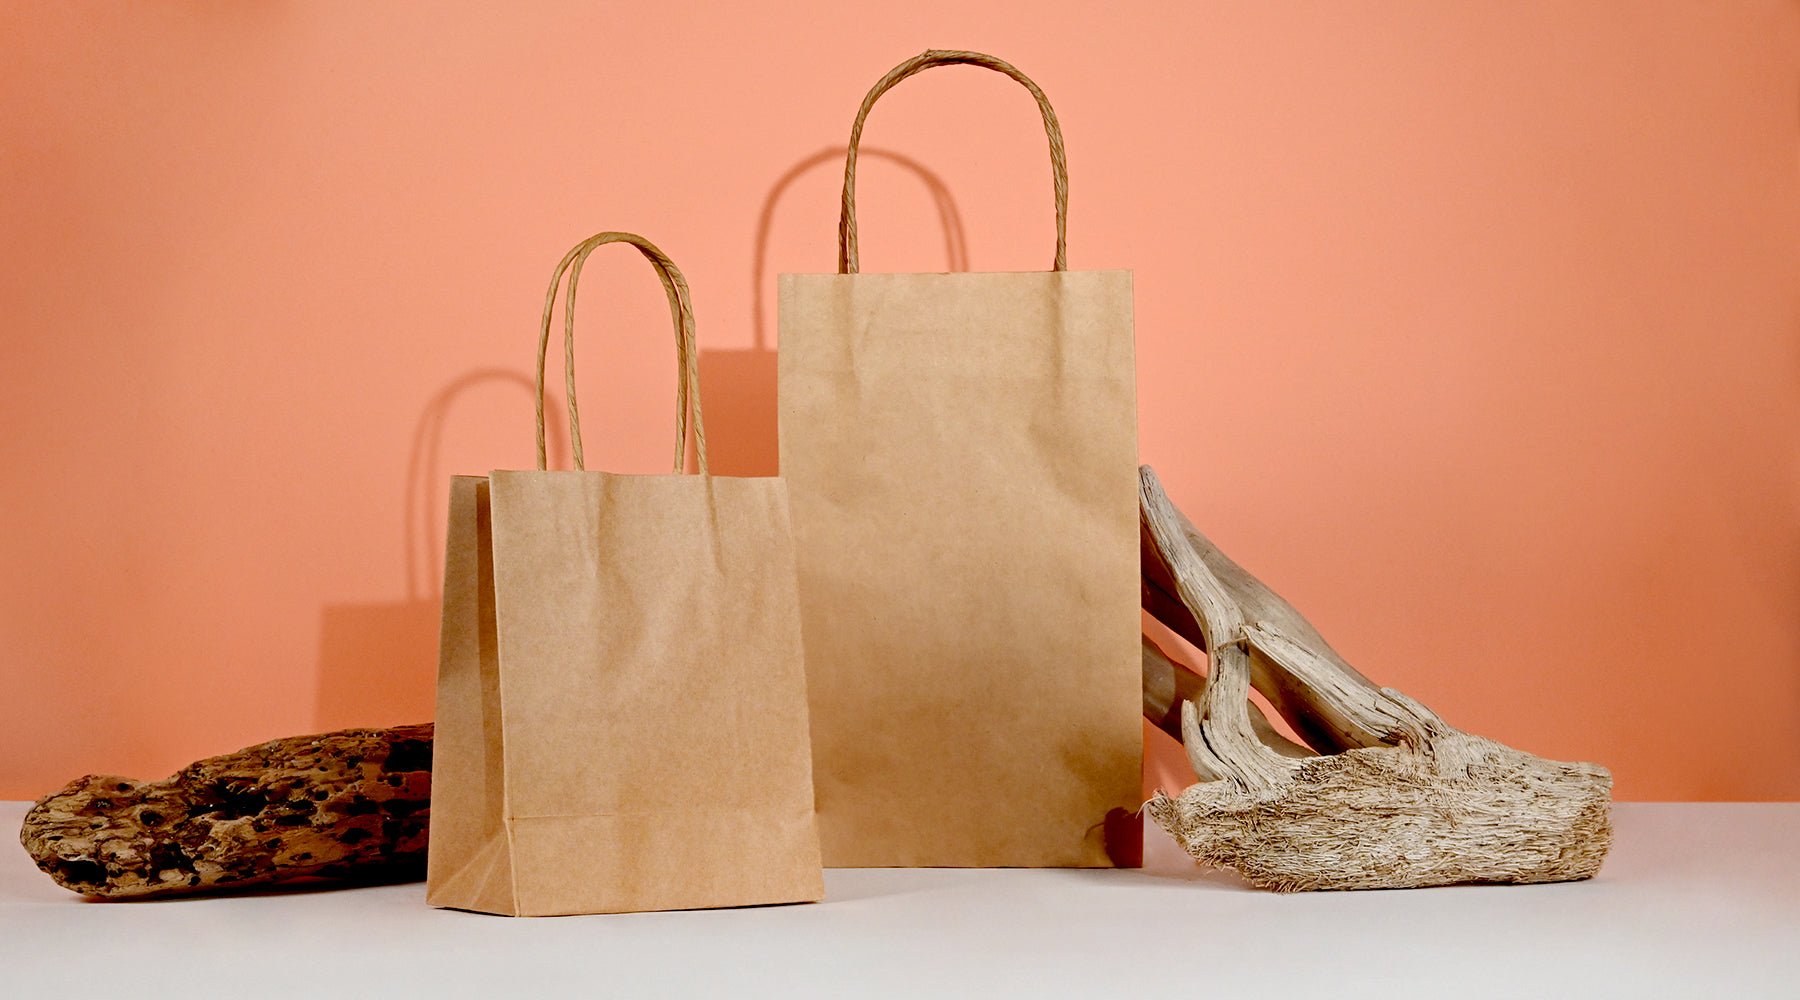 Future of Paper Bags and How can you Benefit from it?